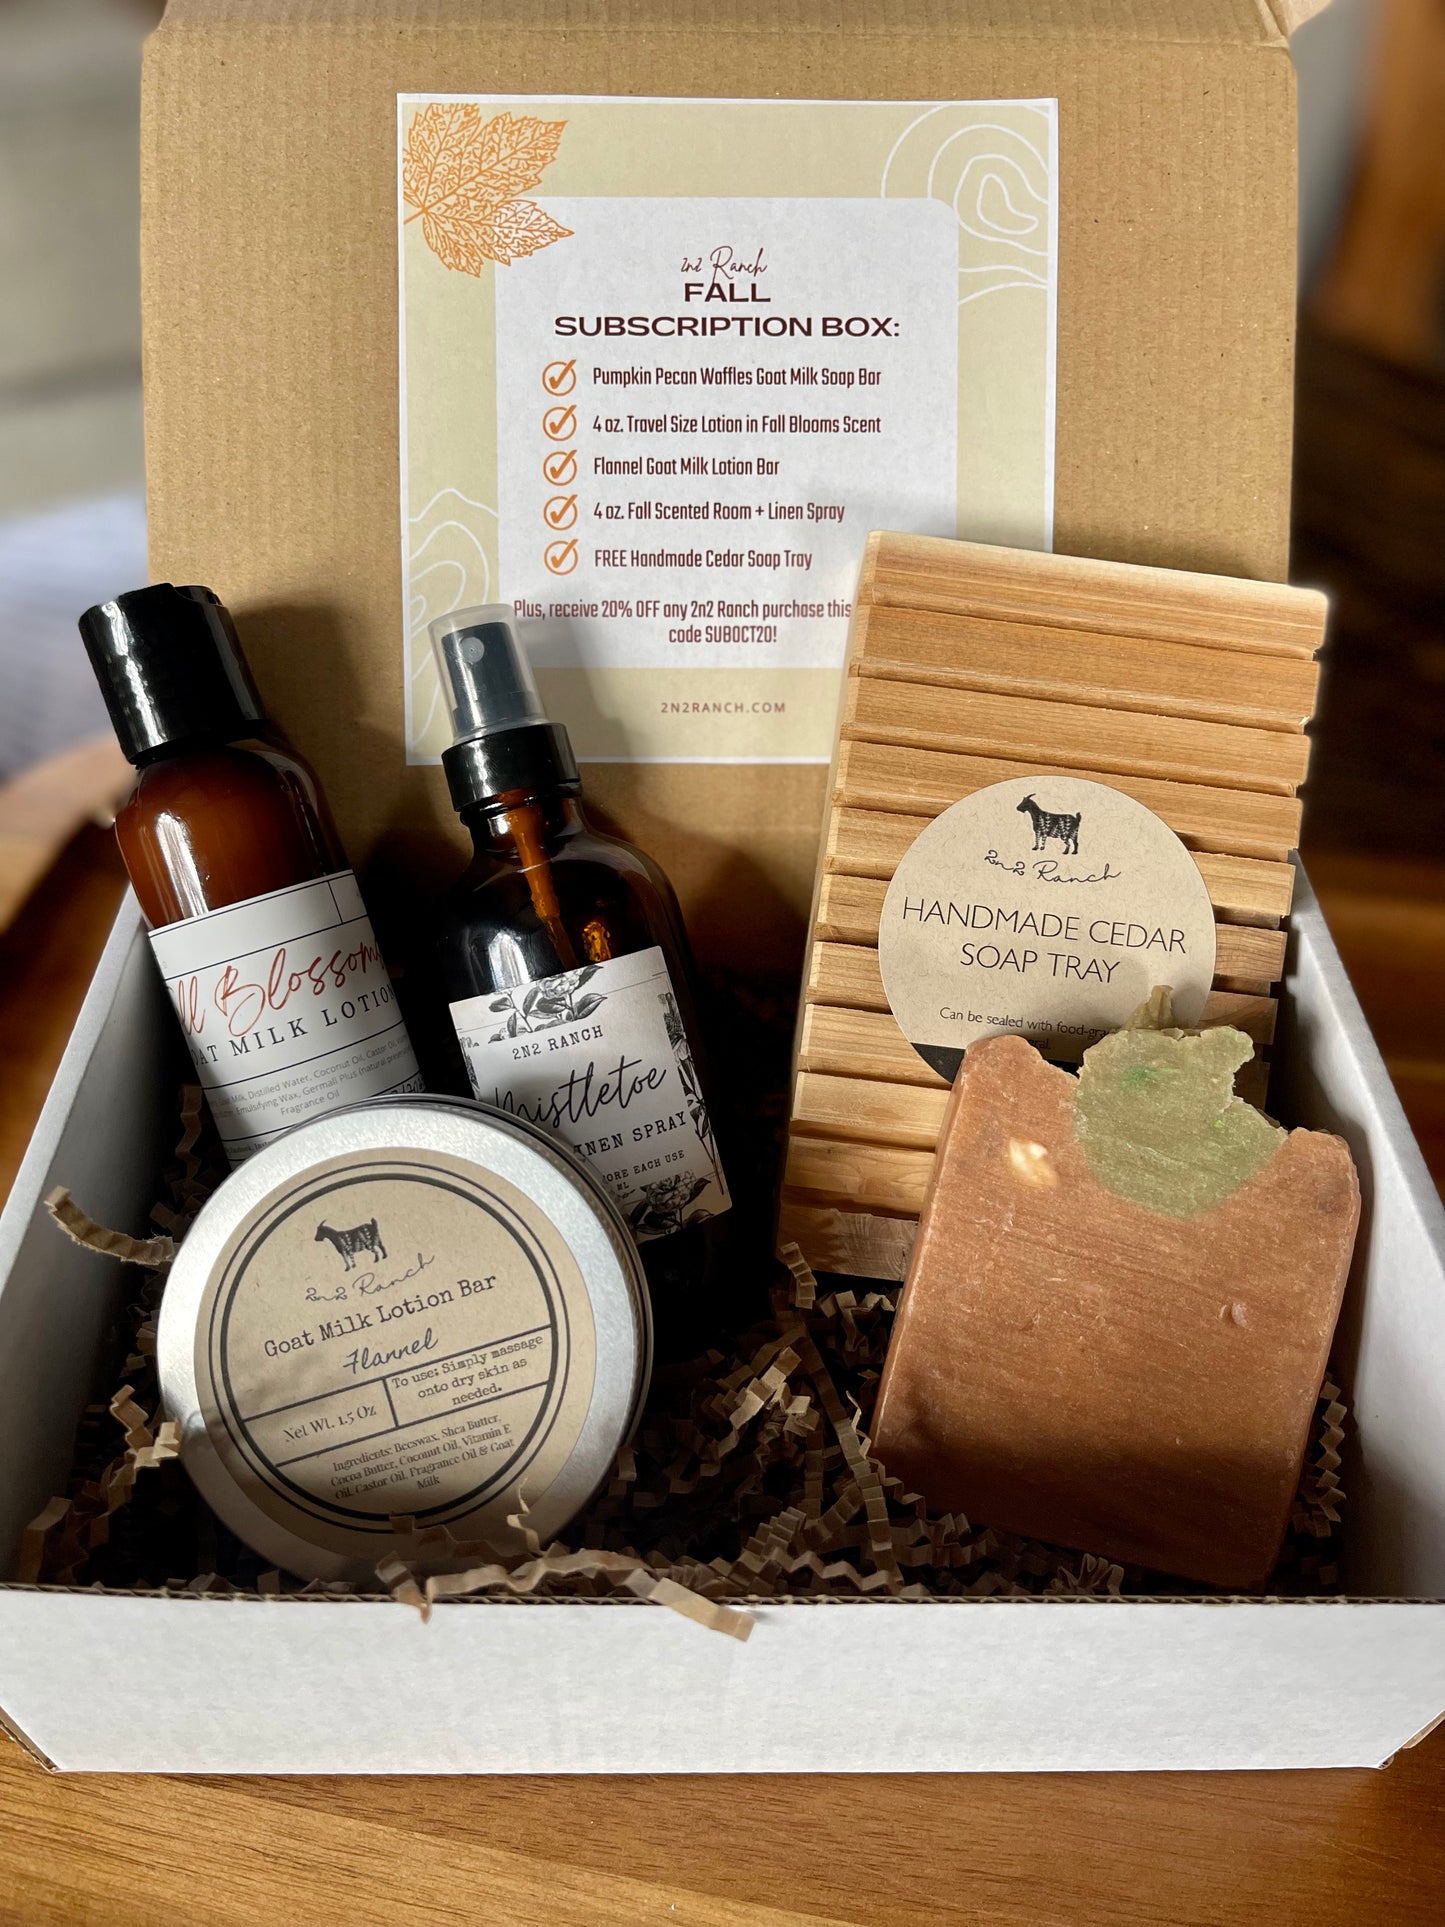 Subscription box-Monthly Subscription or One-Time Purchase